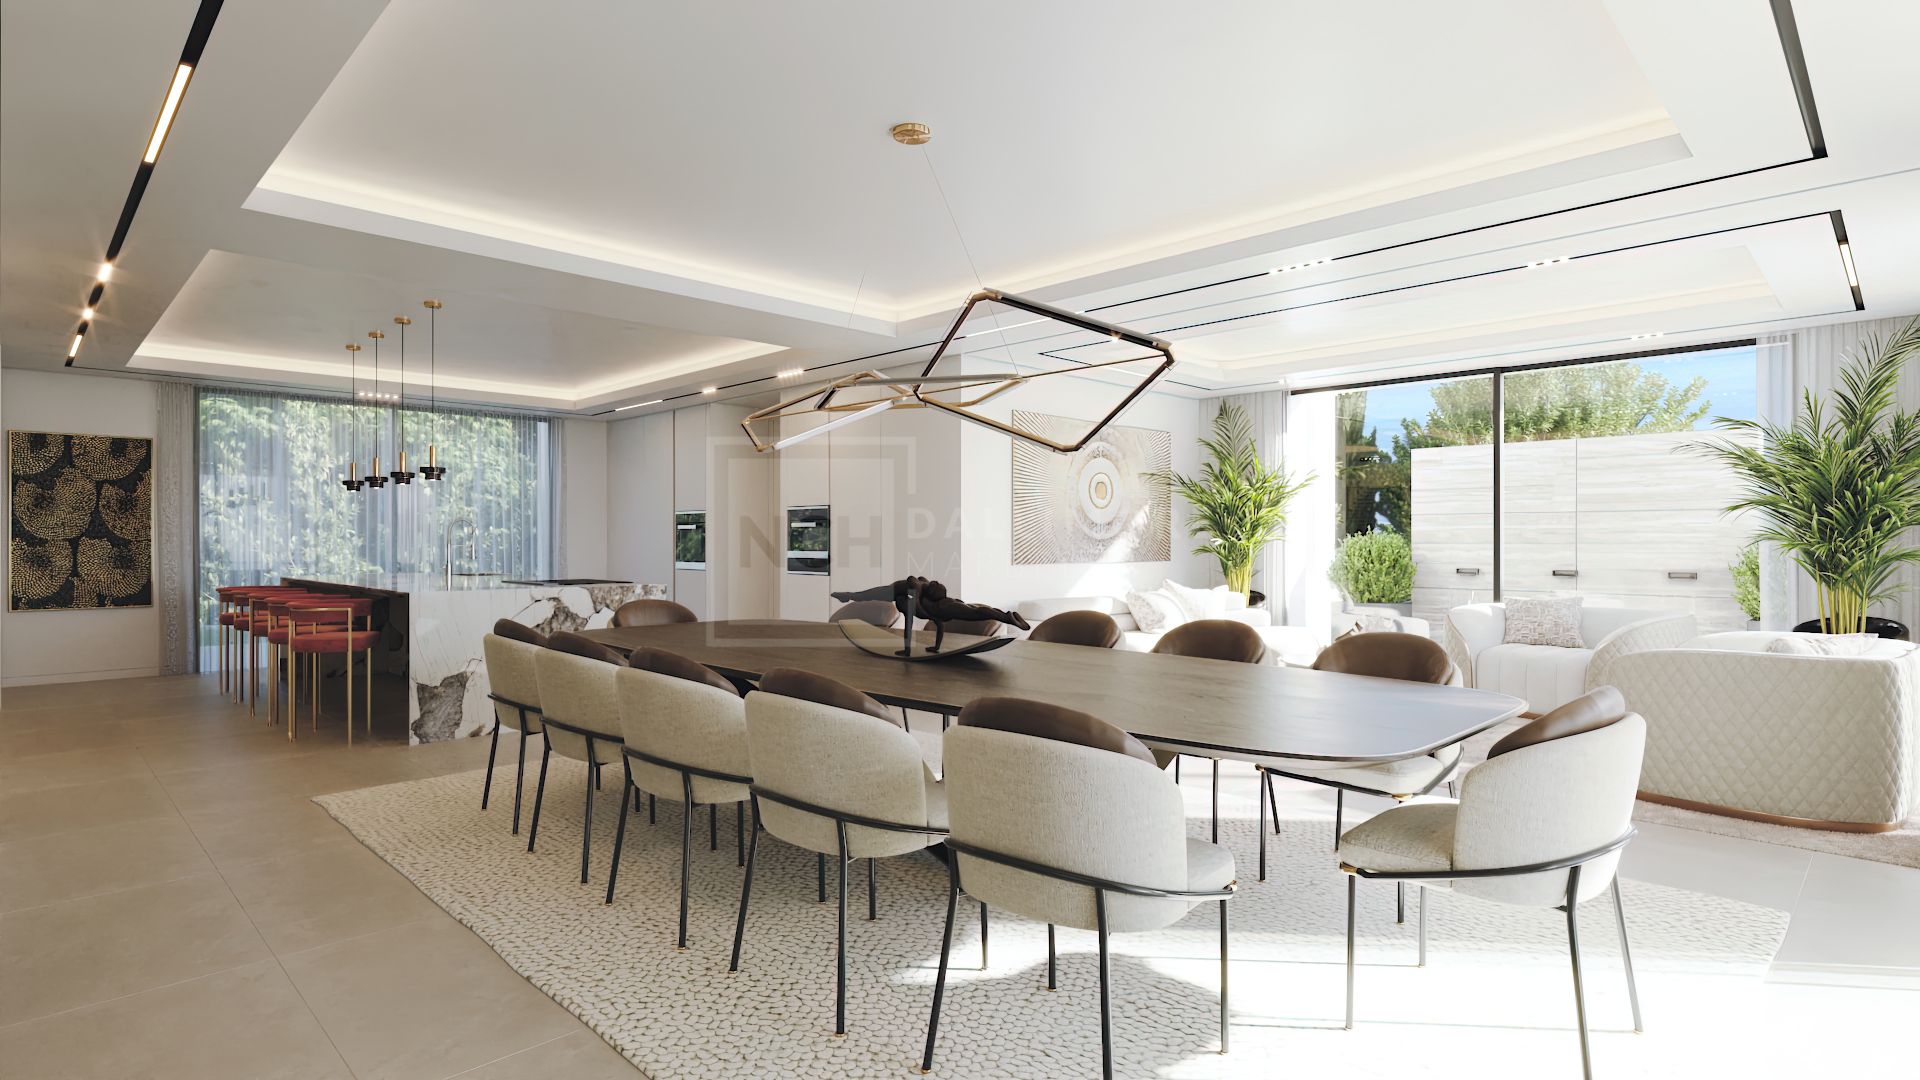 LUXURIOUS VILLA IN MARBELLA - A STATE-OF-THE-ART PROPERTY WITH BREATHTAKING VIEWS